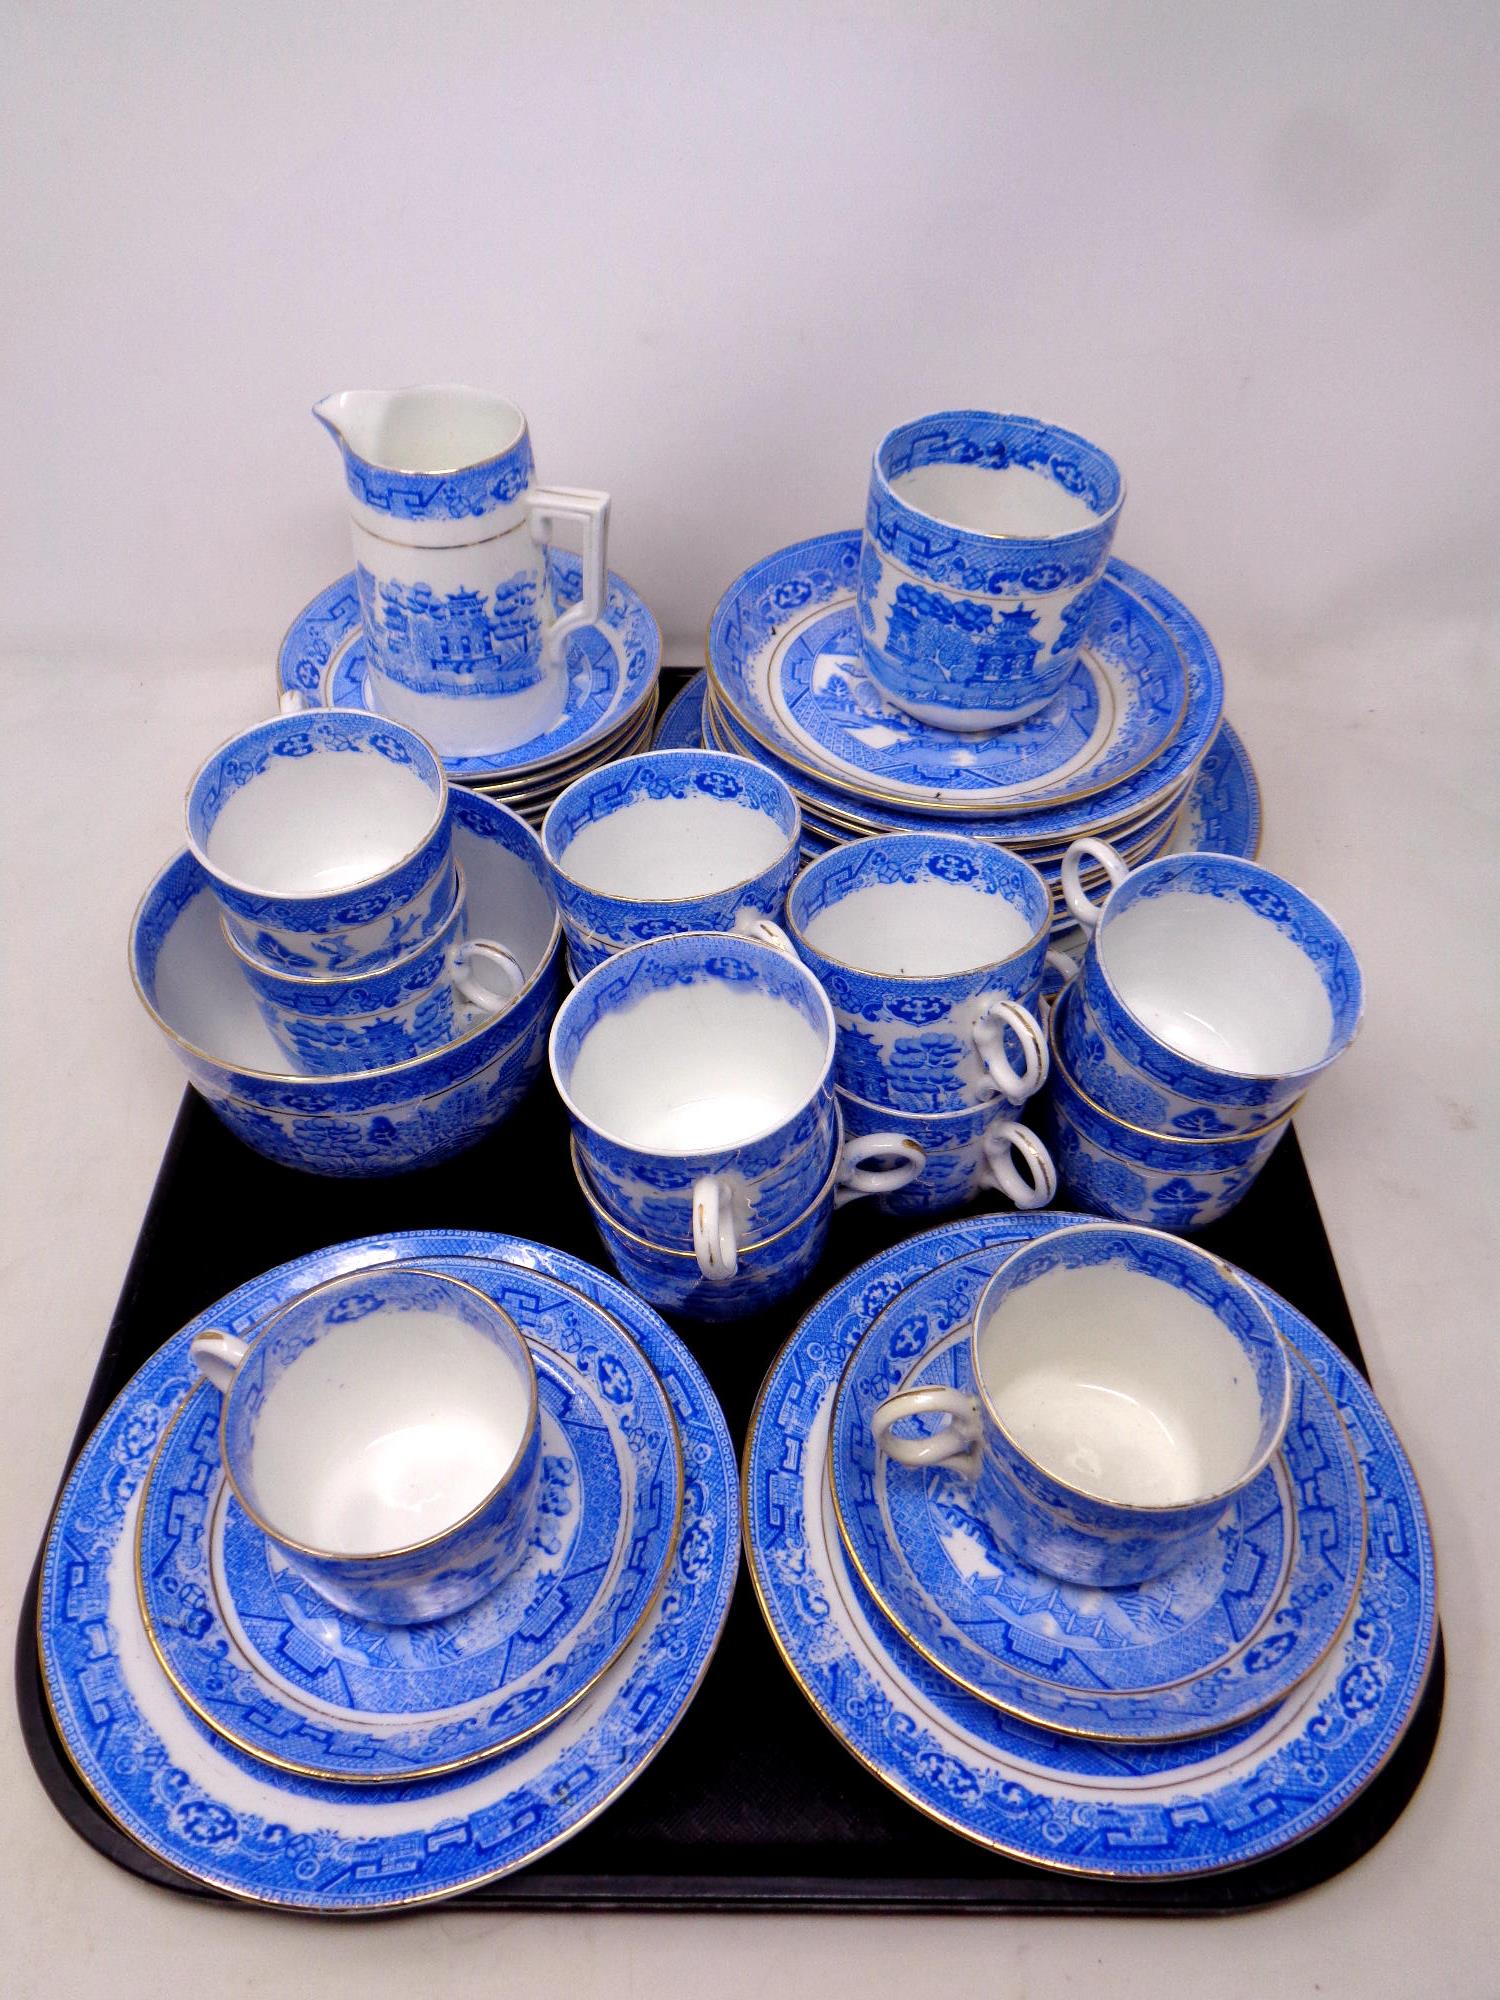 A tray containing forty pieces of antique Staffordshire willow pattern tea china